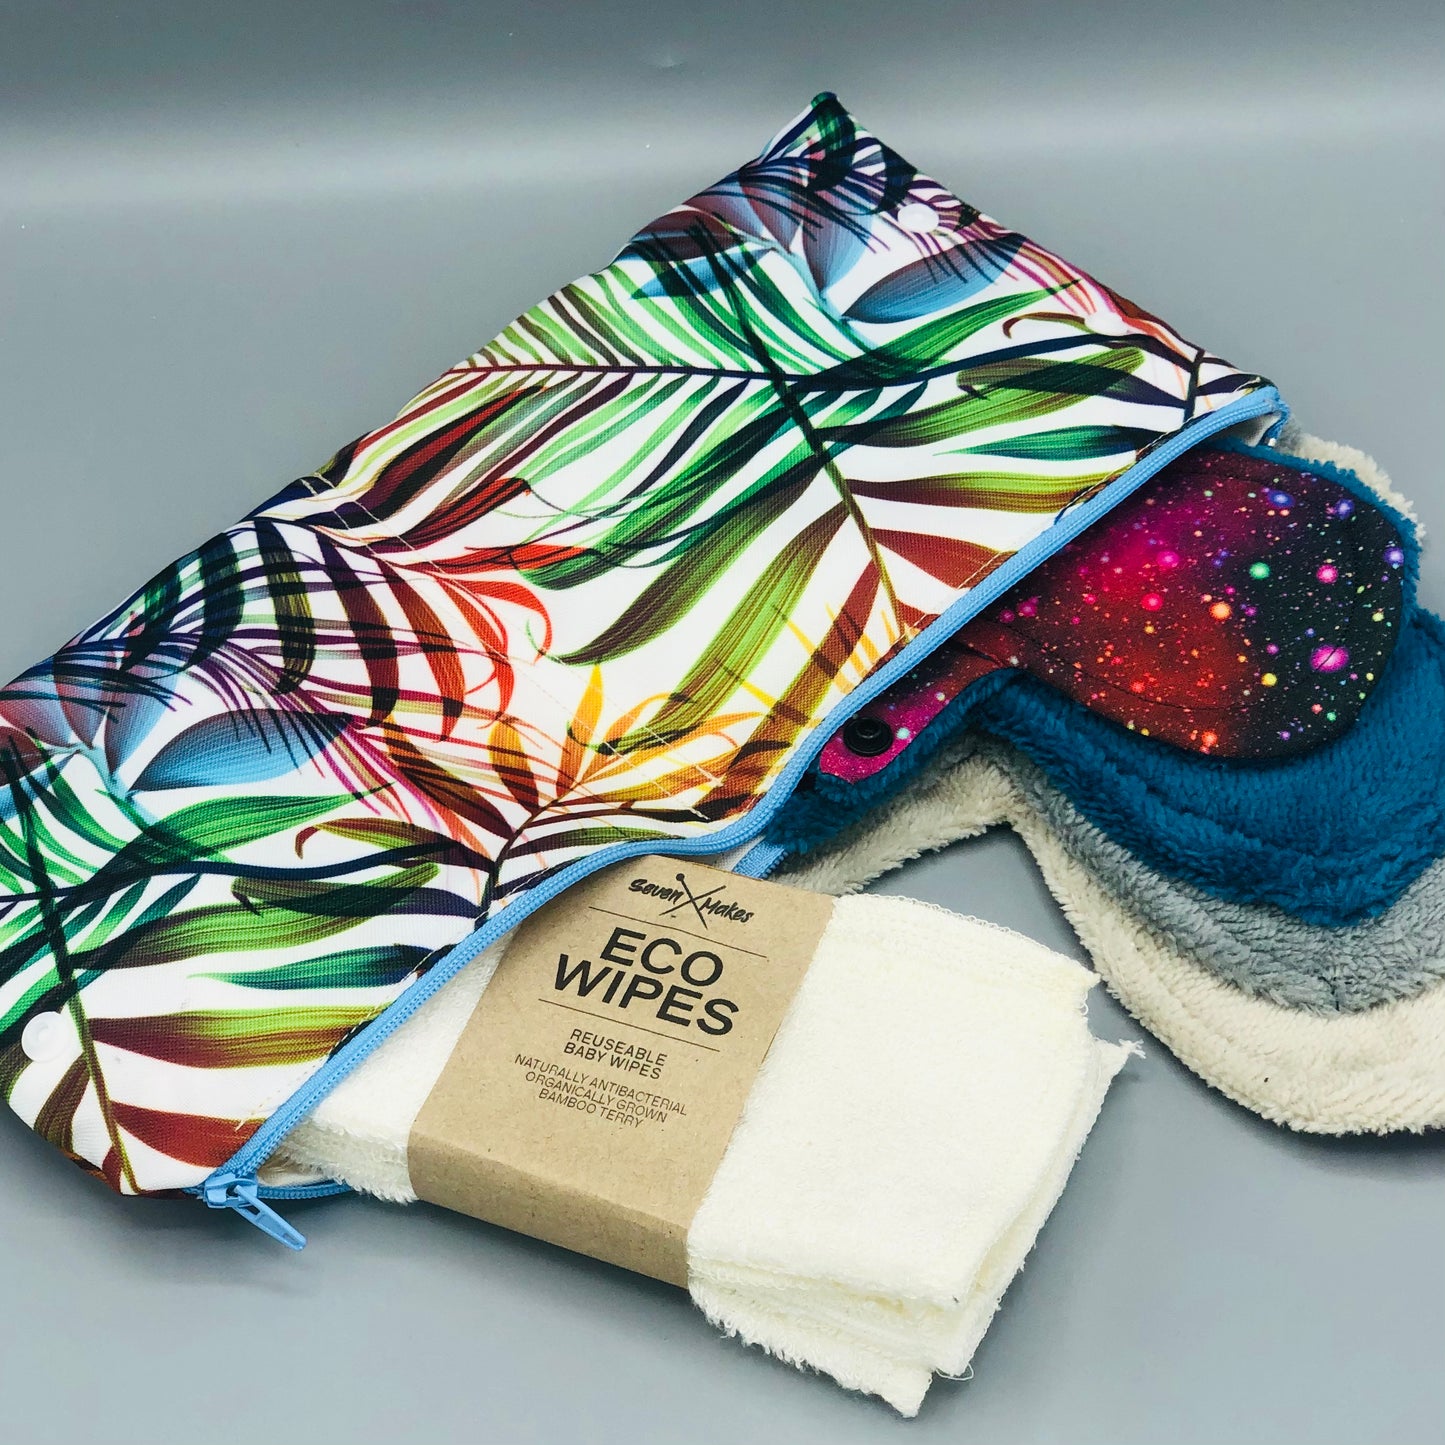 Luxury Reusable Sanitary Pads - super absorbent, eco friendly alternative to disposable sanitary pads